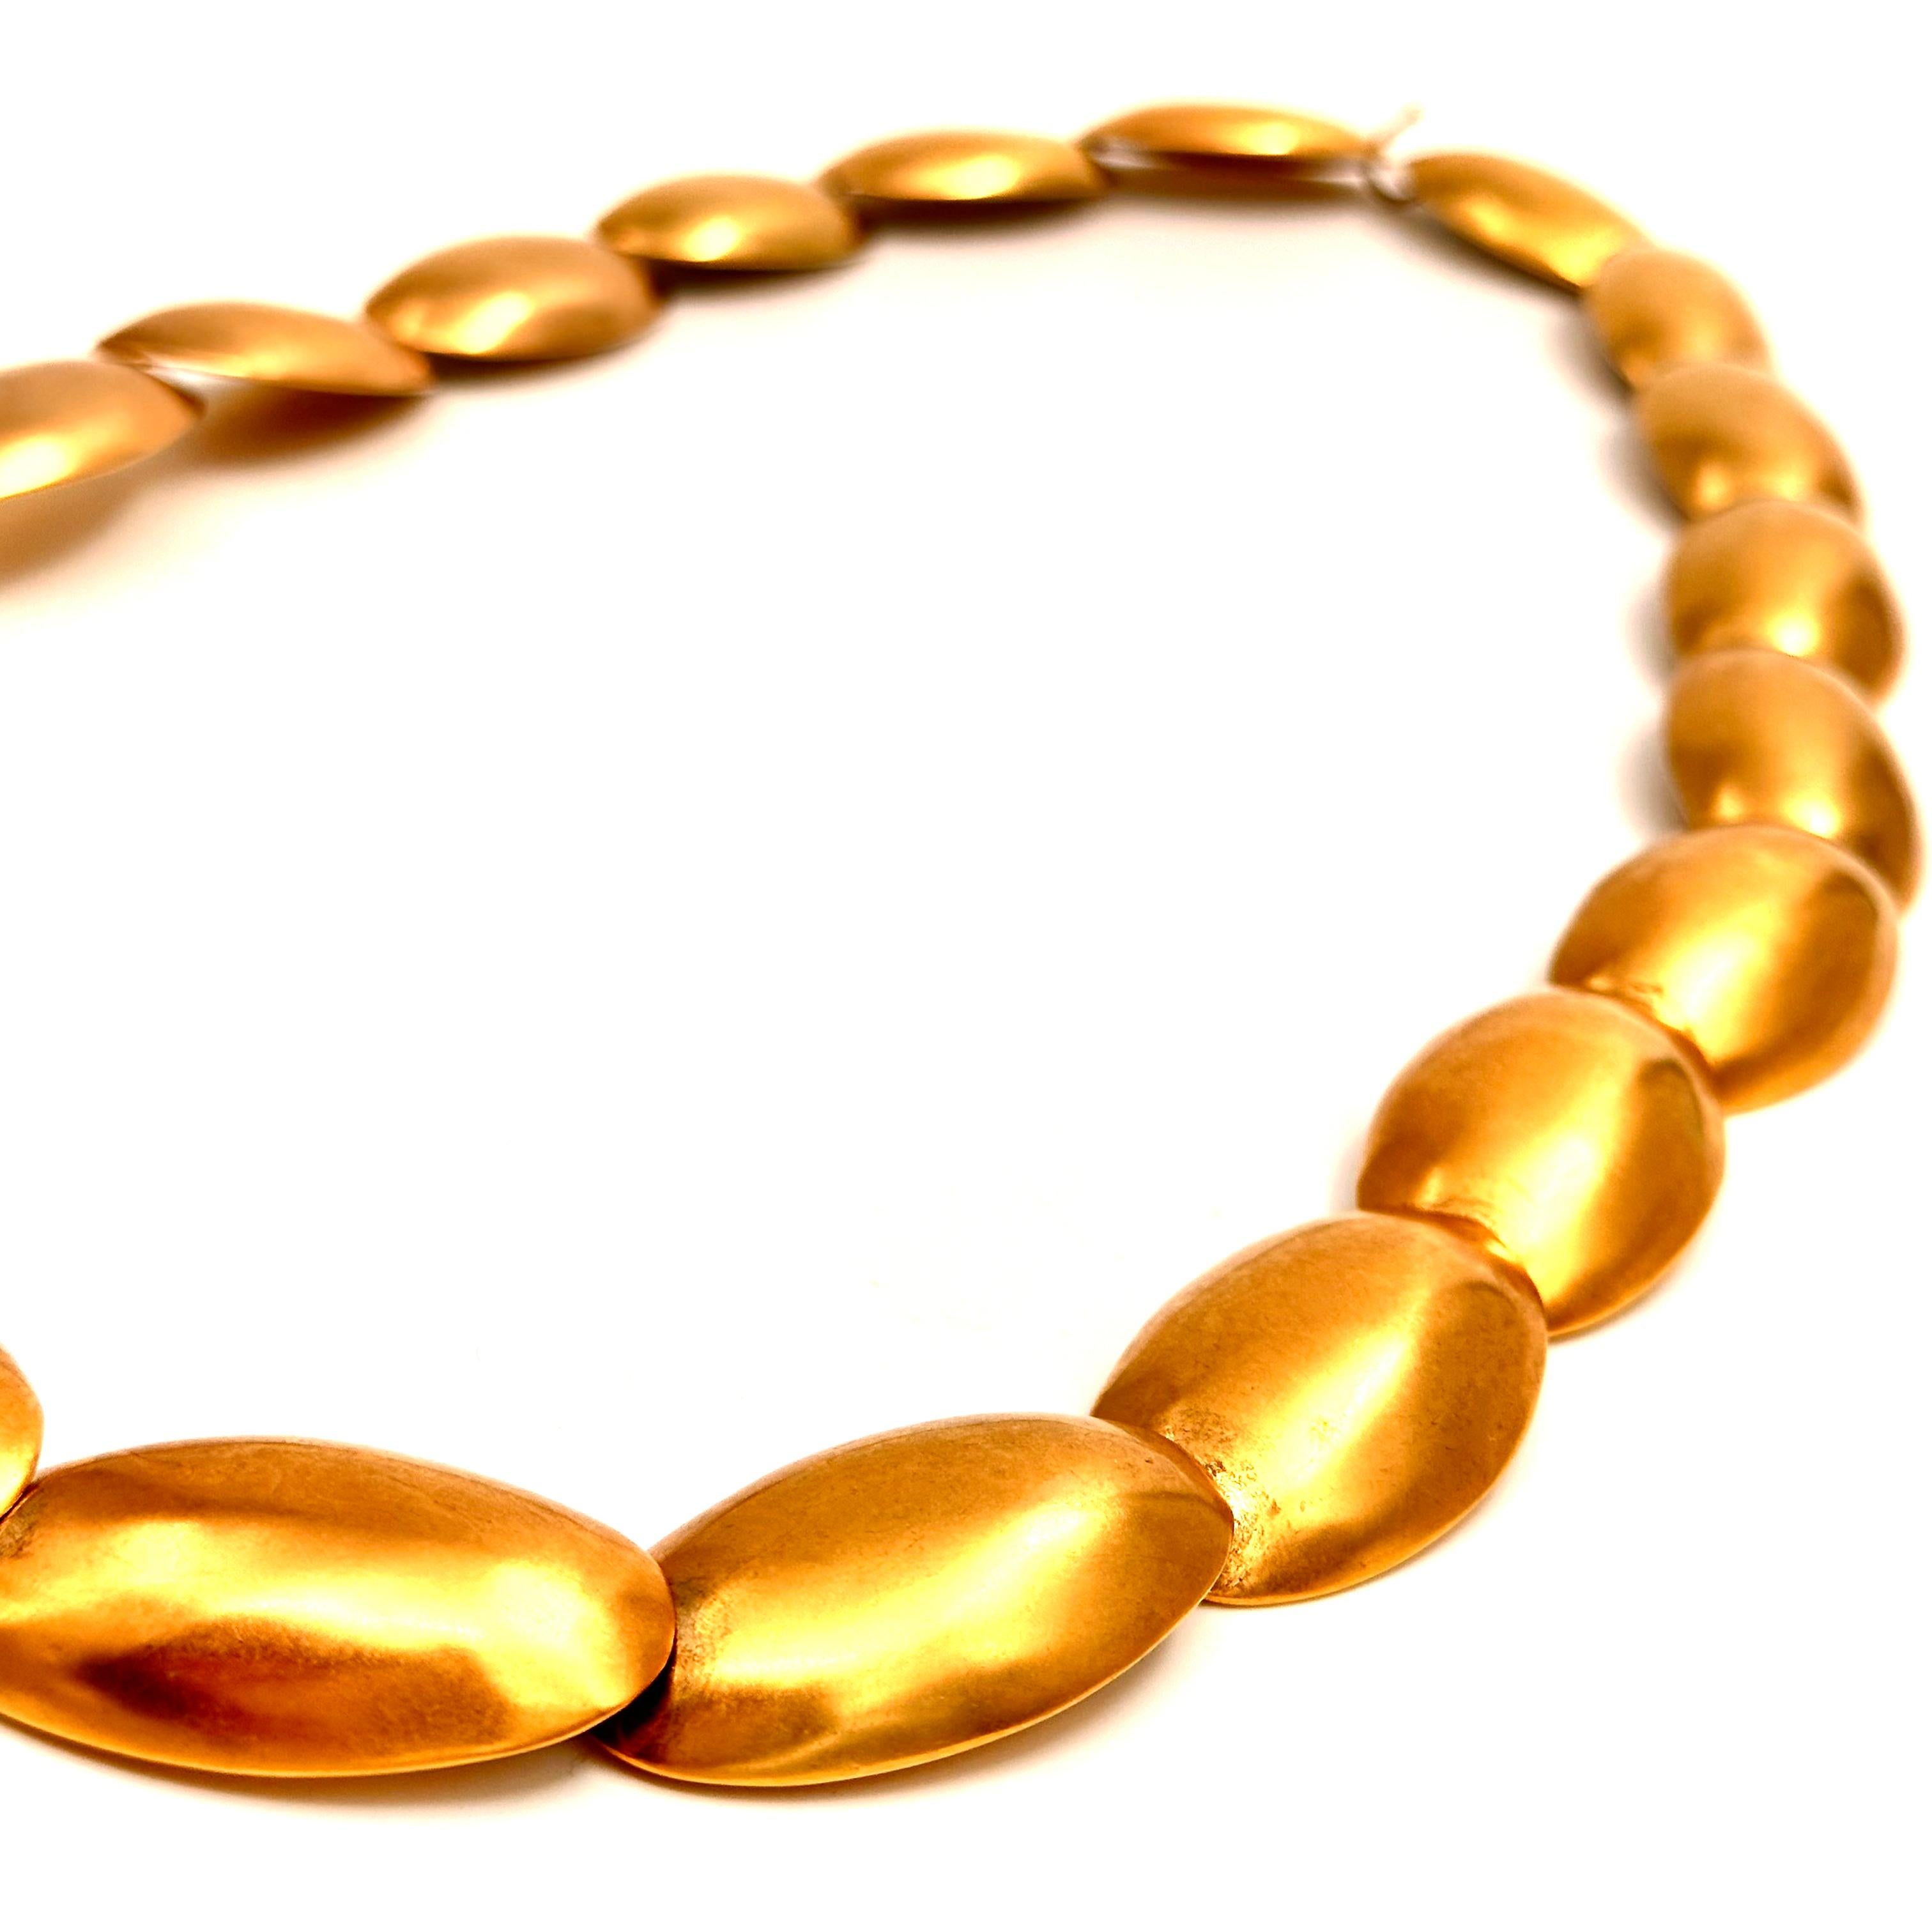 Created in 1987 for the Donna Karan collections, where the theme was soft pebbles, this belt length necklace is composed of repeating egg forms that are solid brass, plated in a semi shiny gold. Used as belts these softly gliding forms added to the